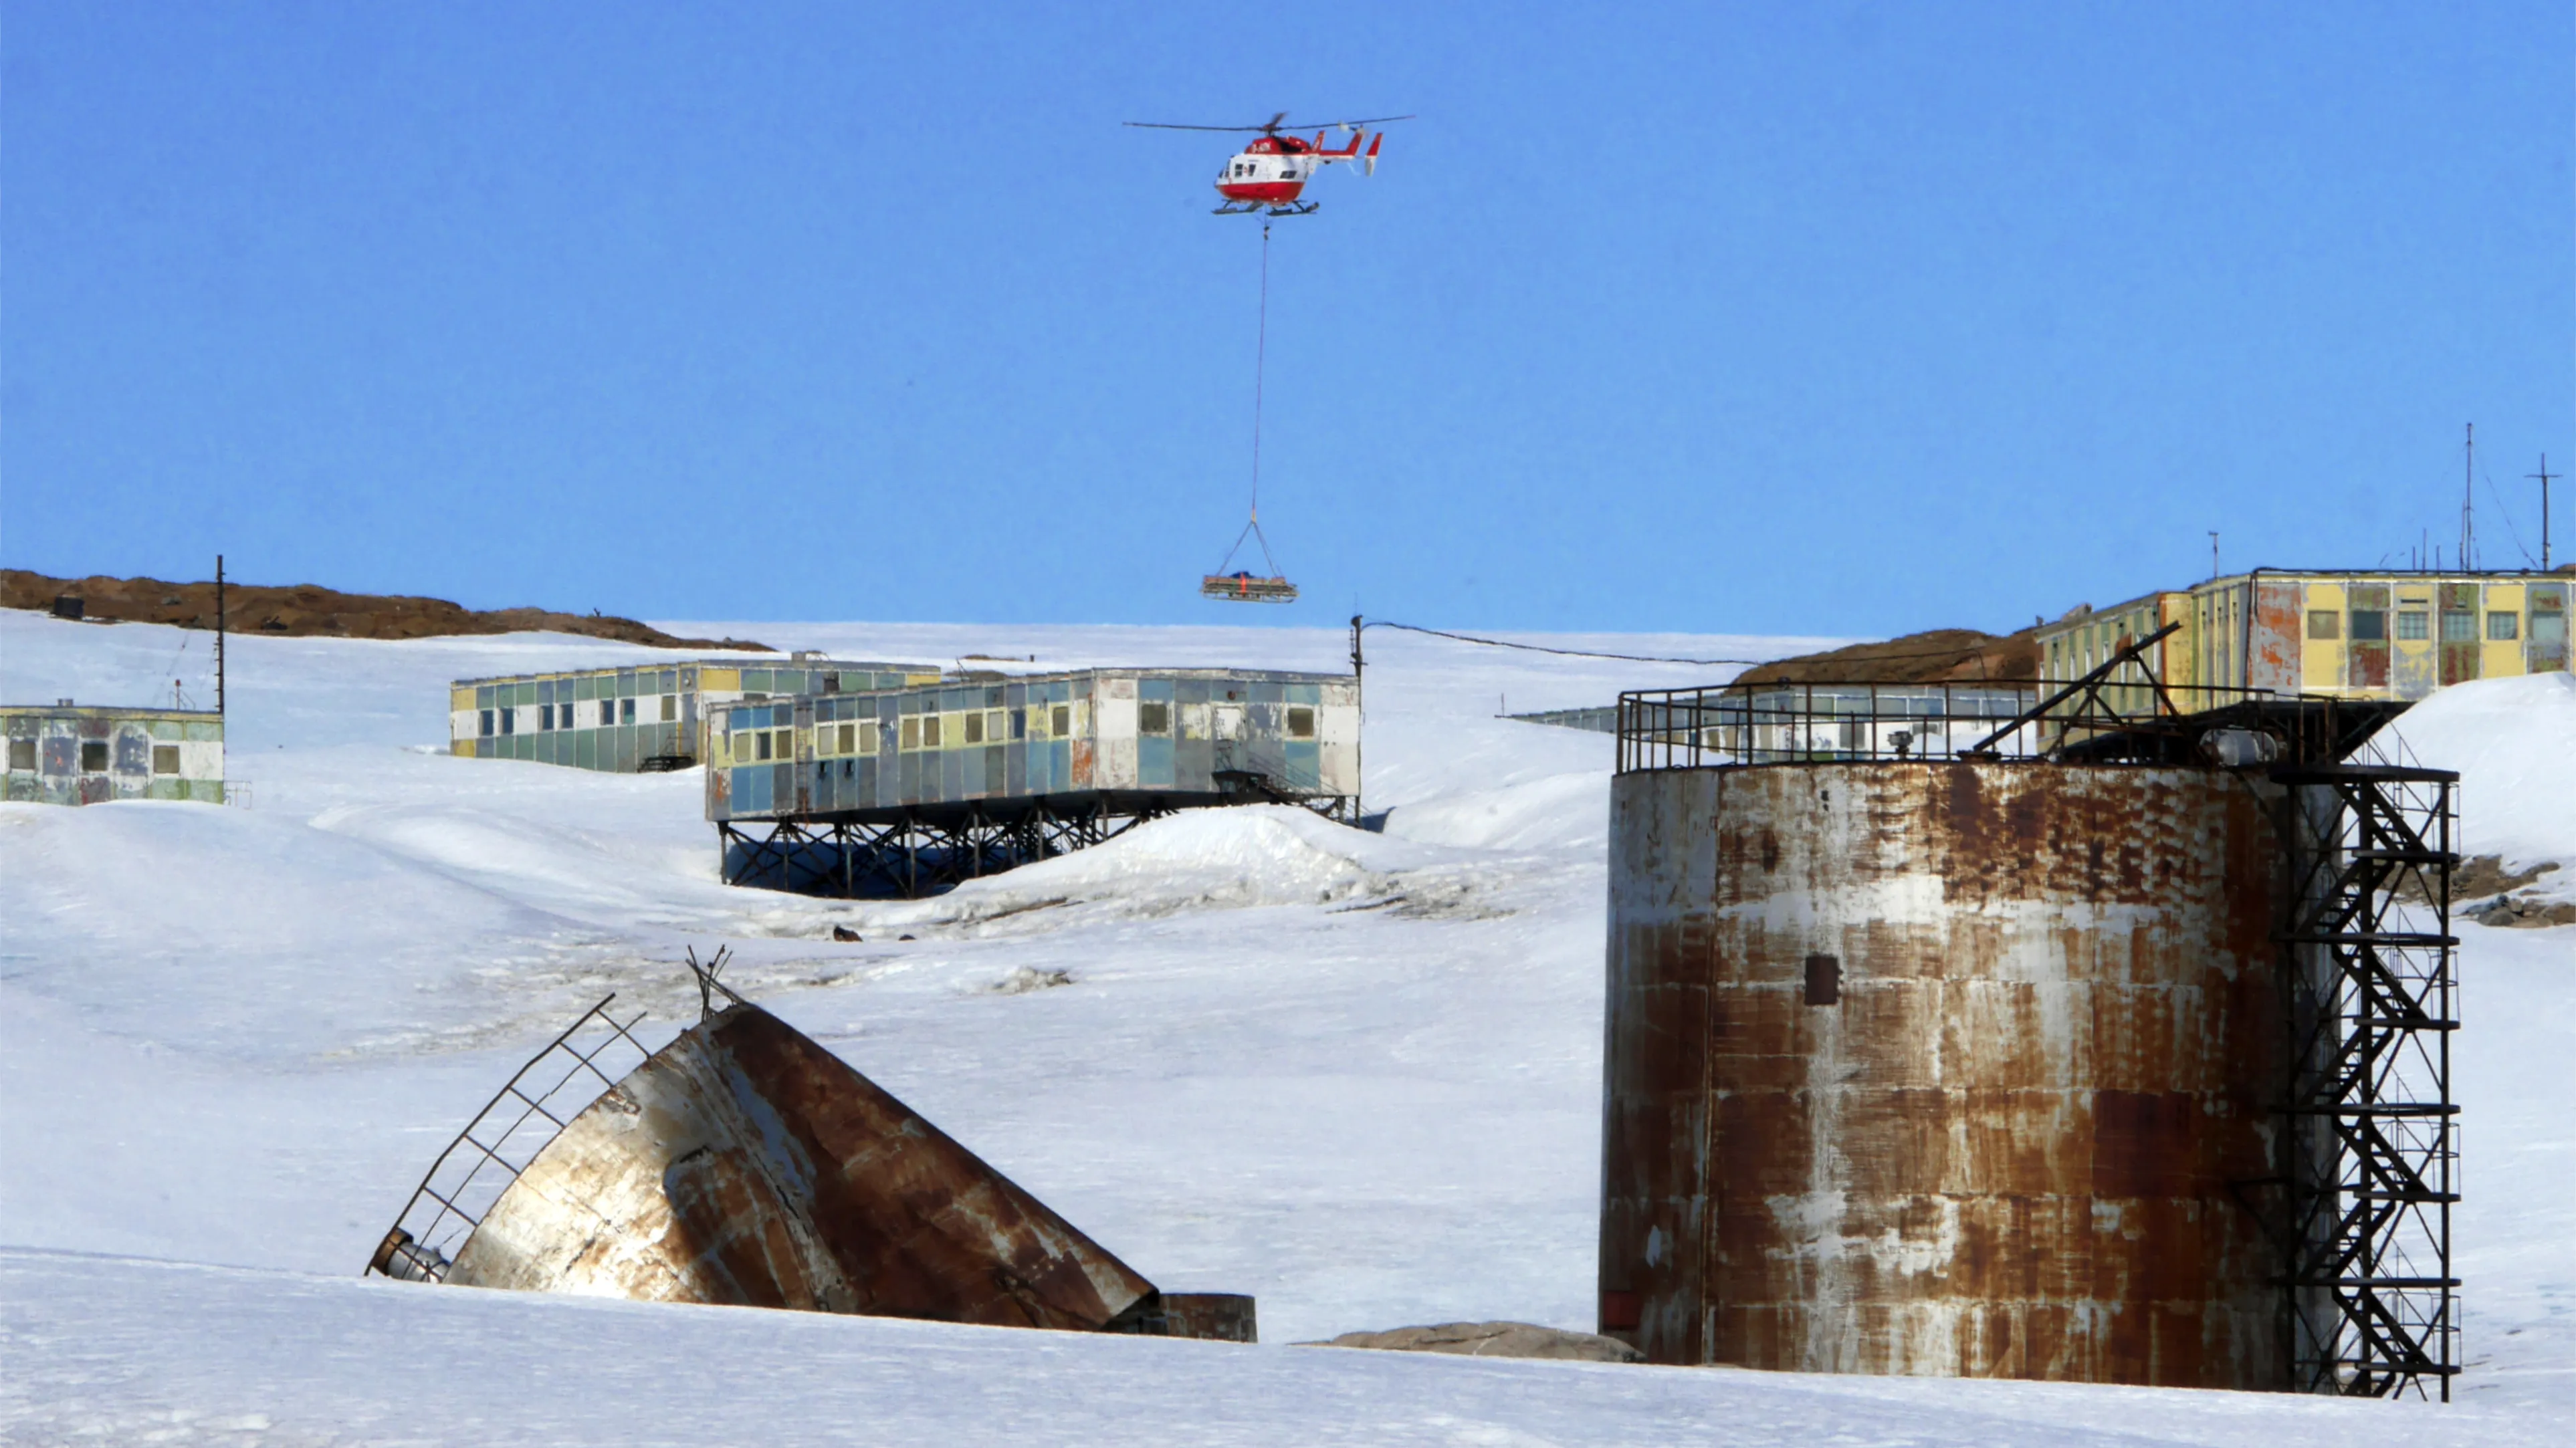 A red helicopter flies over a collection of old buildings on stilts in the snow with faded peeling paint and two metal silos in the foreground, one of which is crushed and broken.